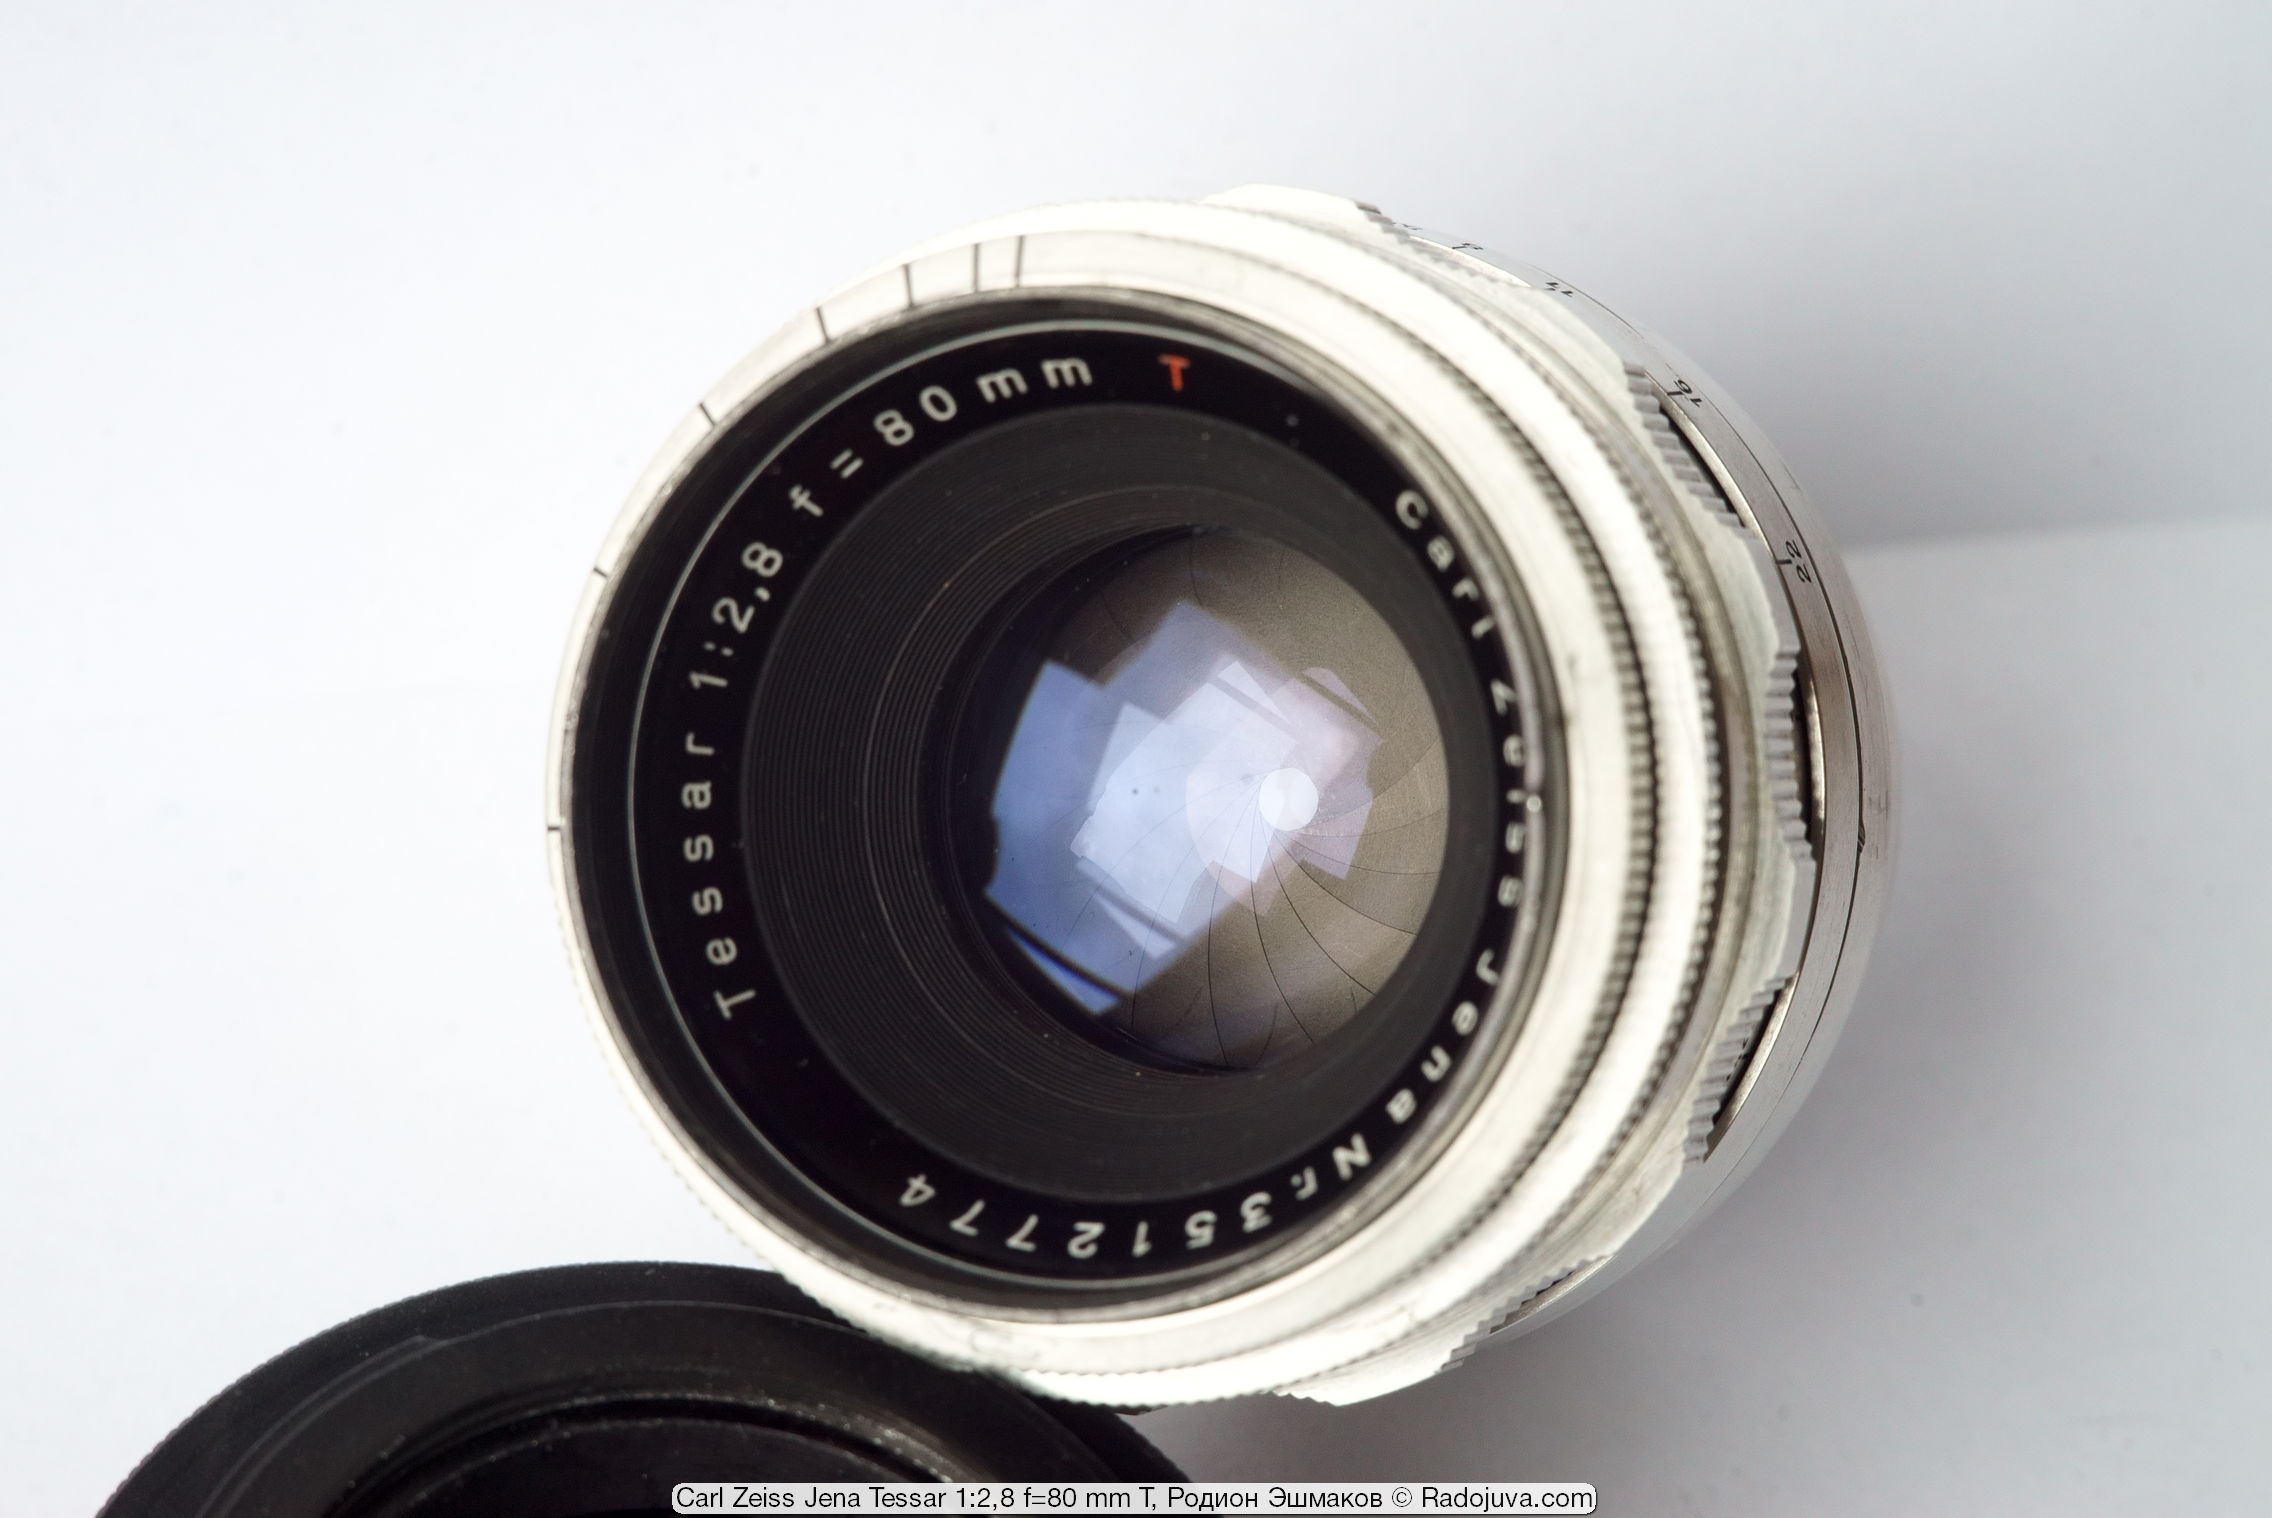 The blades of the Tessar 80 / 2.8 diaphragm are nicely blackened and matted.